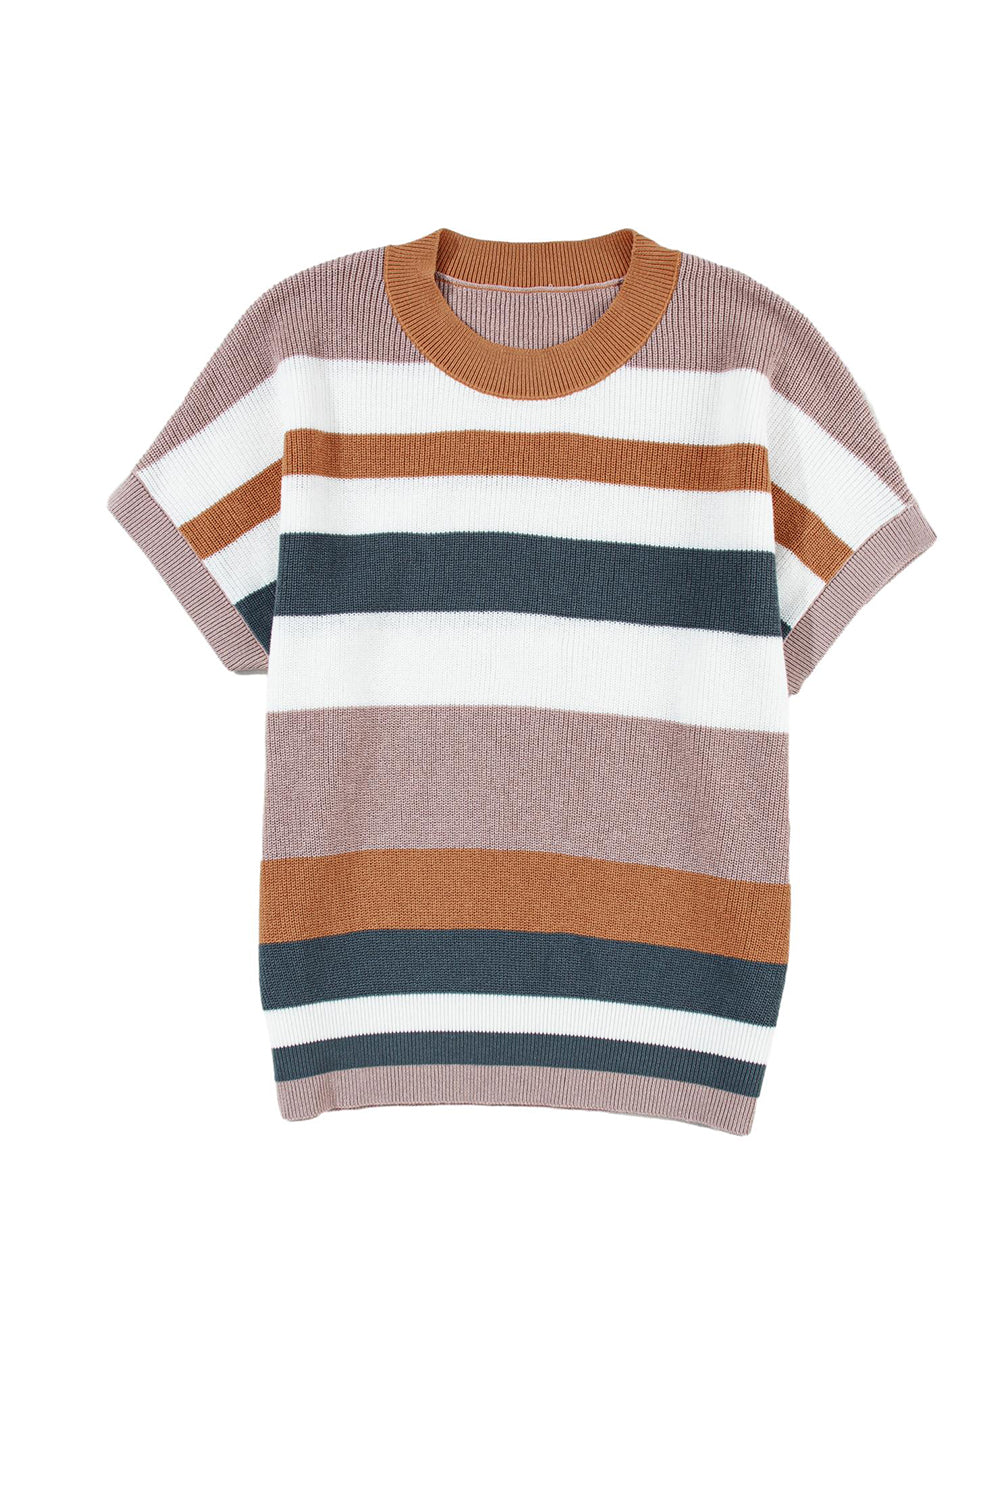 Camel Striped Knit Crew Neck T Shirt Sweater